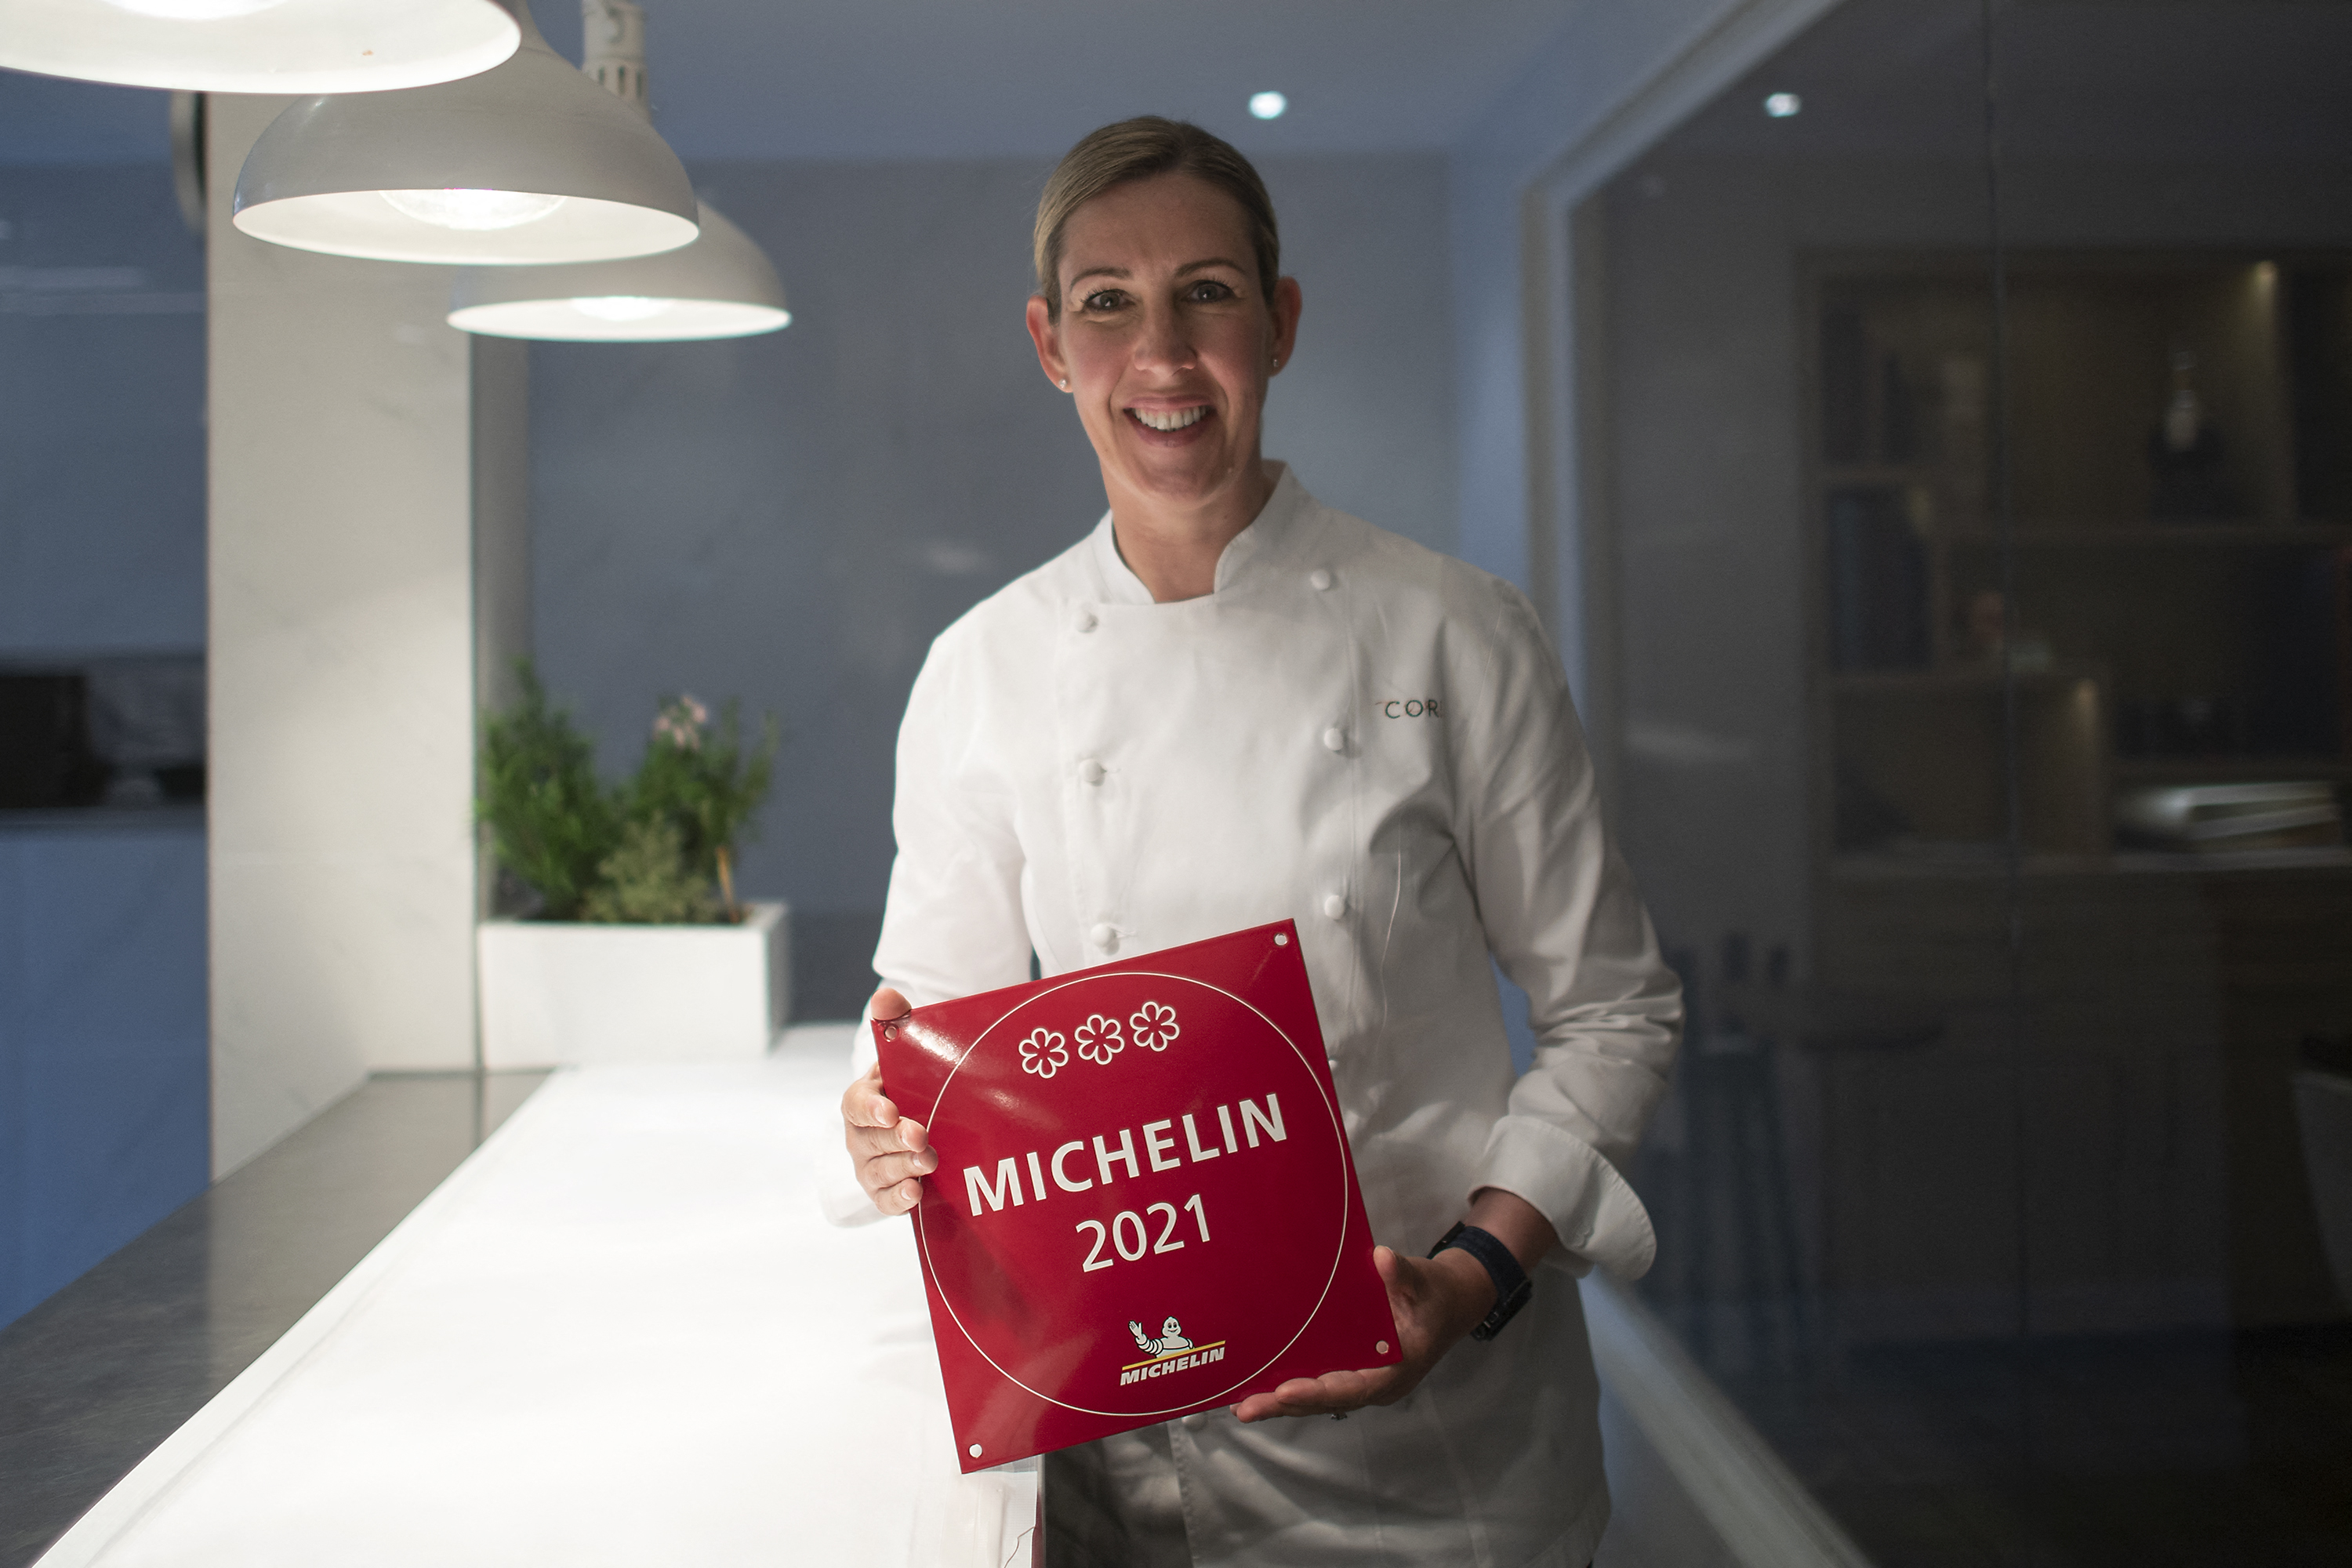 Clare Smyth stands in chef’s whites, holding a red plaque that reads “Michelin 2021” in white capital letters, with three stars above the lettering